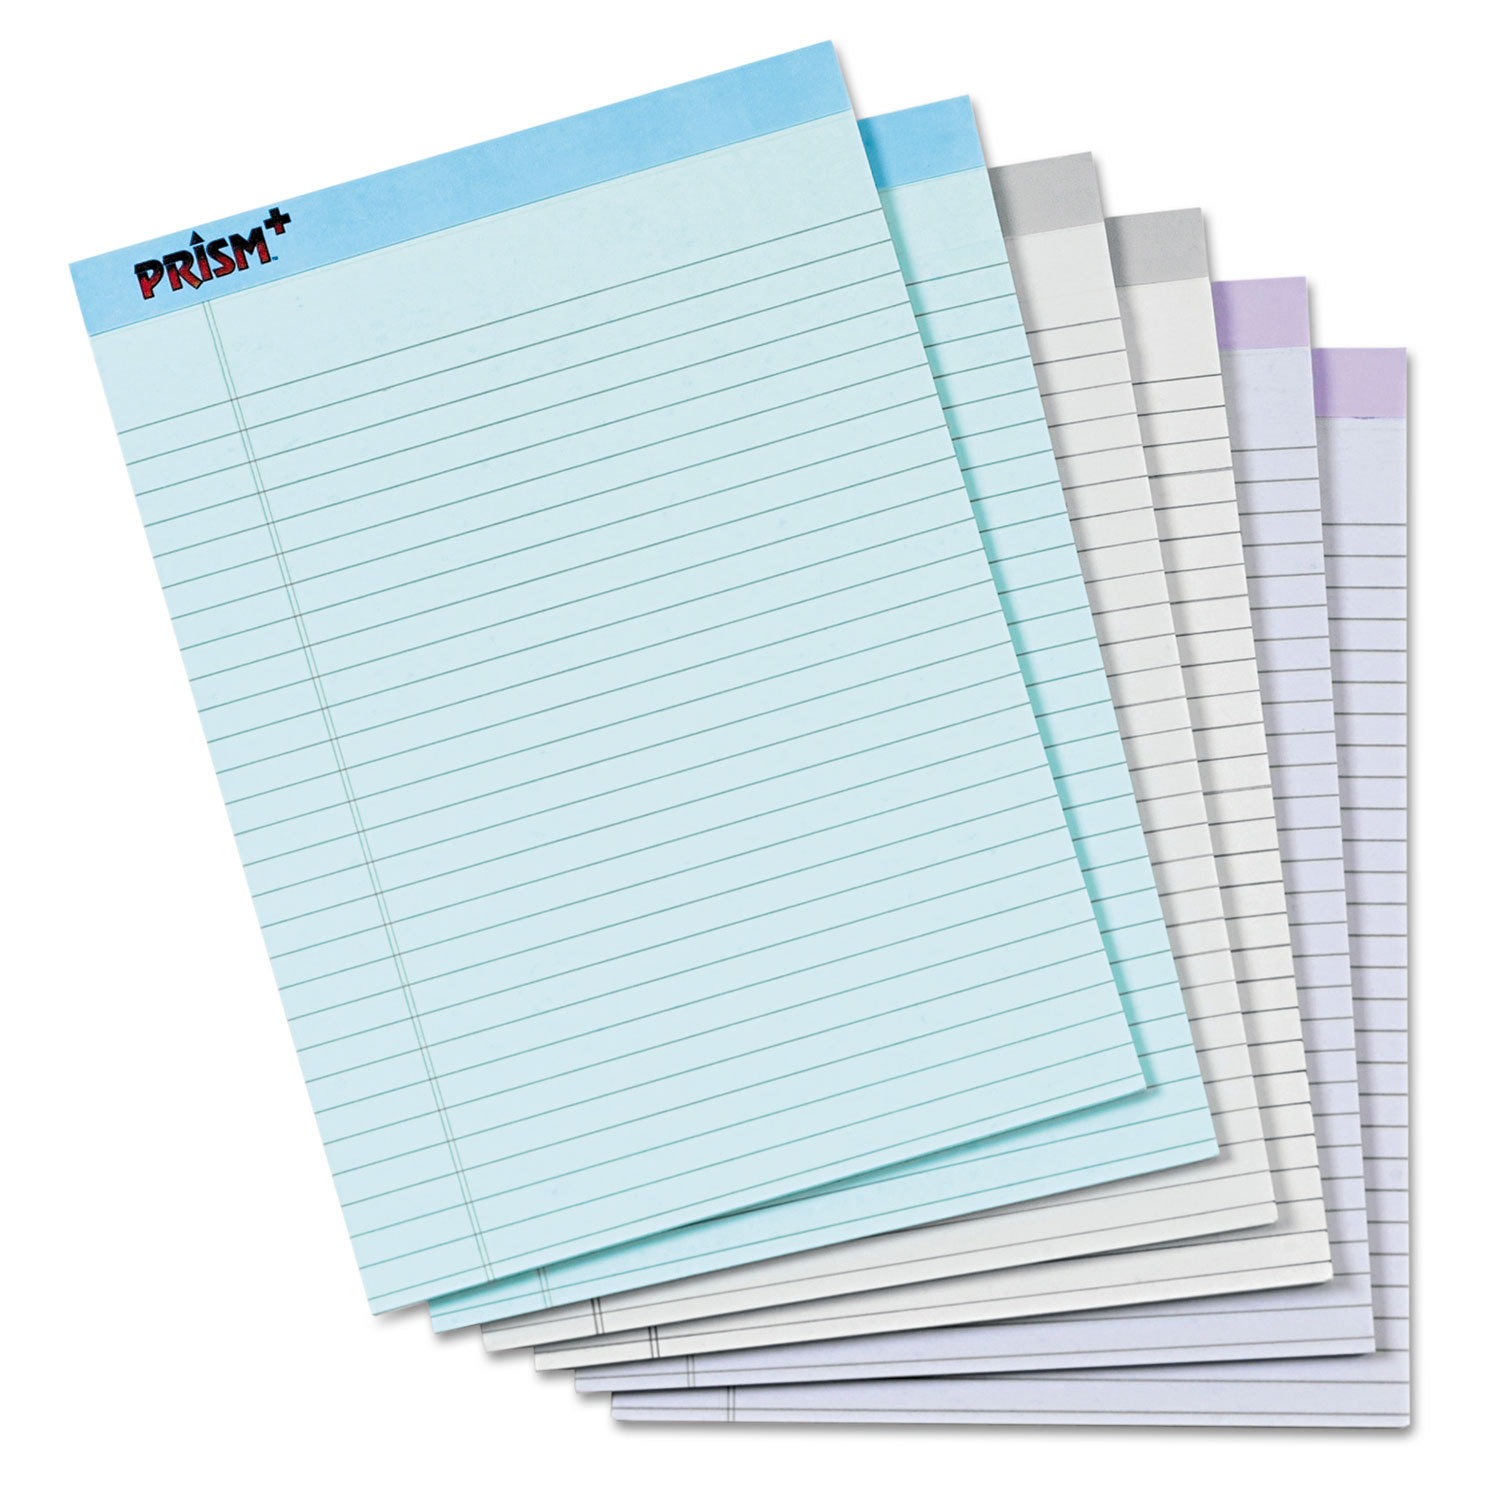 Prism Plus Colored Legal Pads, 8 1/2 x 11 3/4, Pastels, 50 Sheets, 6 Pads/Pack